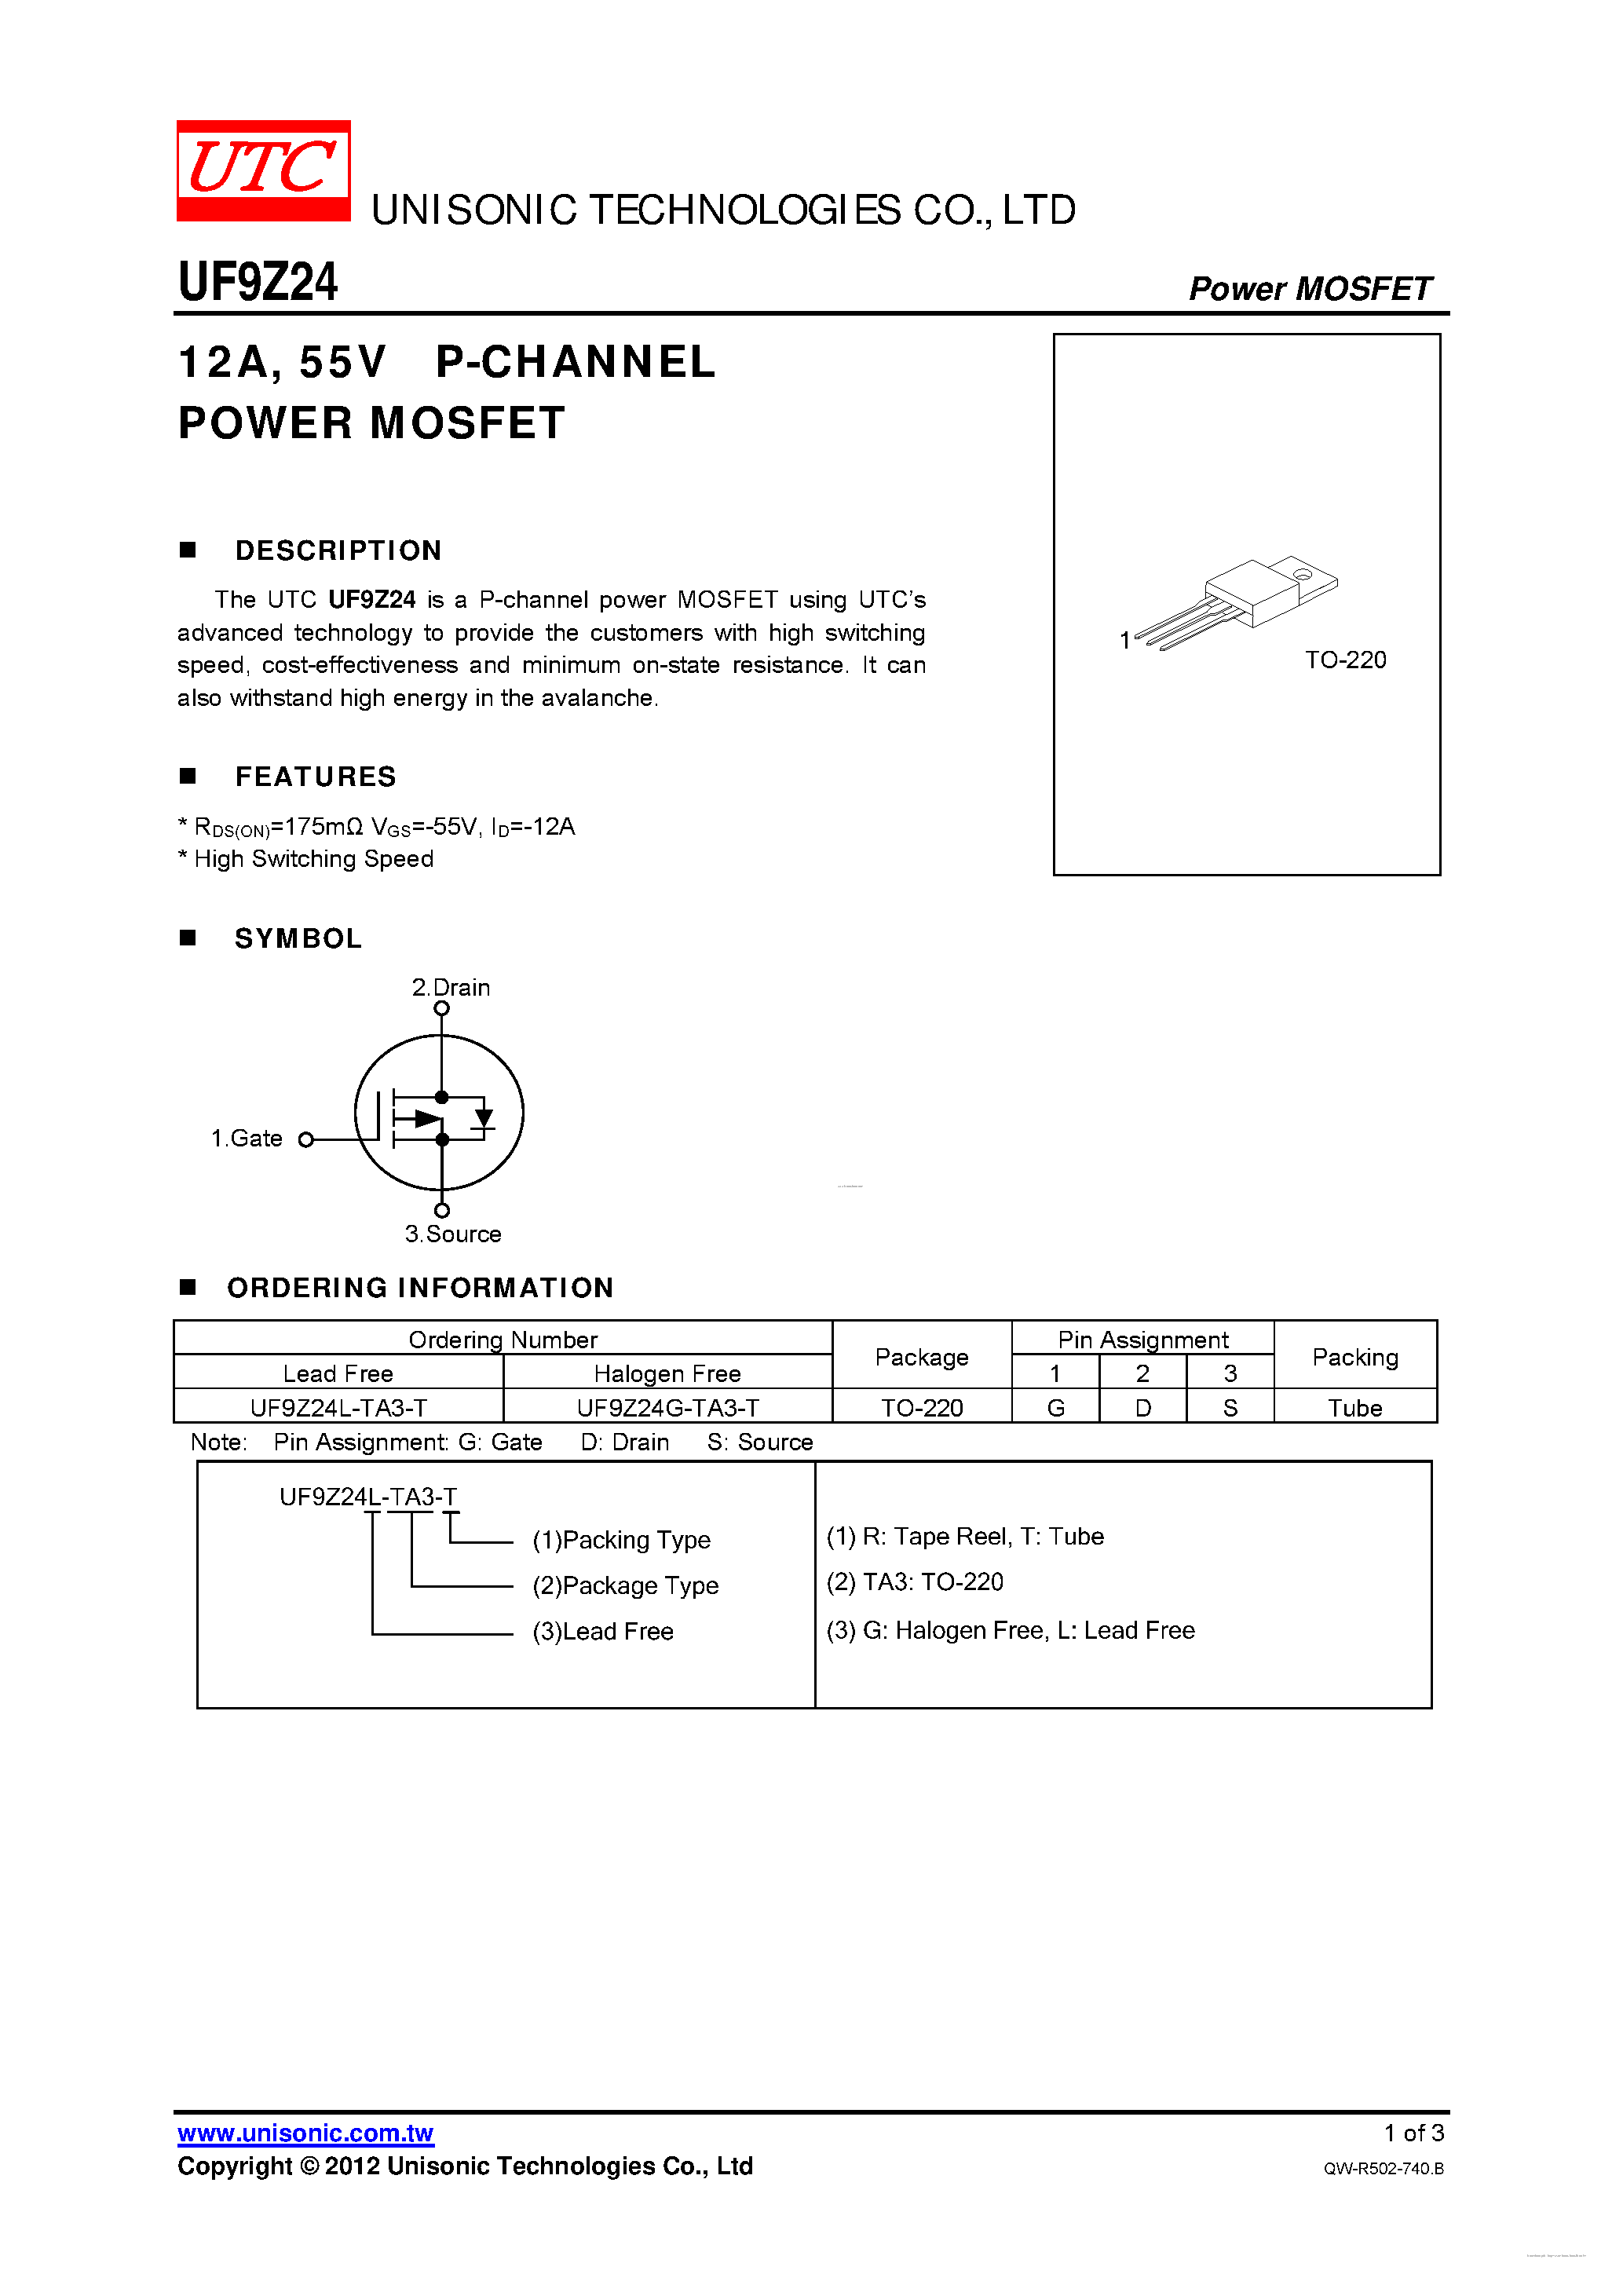 Datasheet UF9Z24 - 55V P-CHANNEL POWER MOSFET page 1